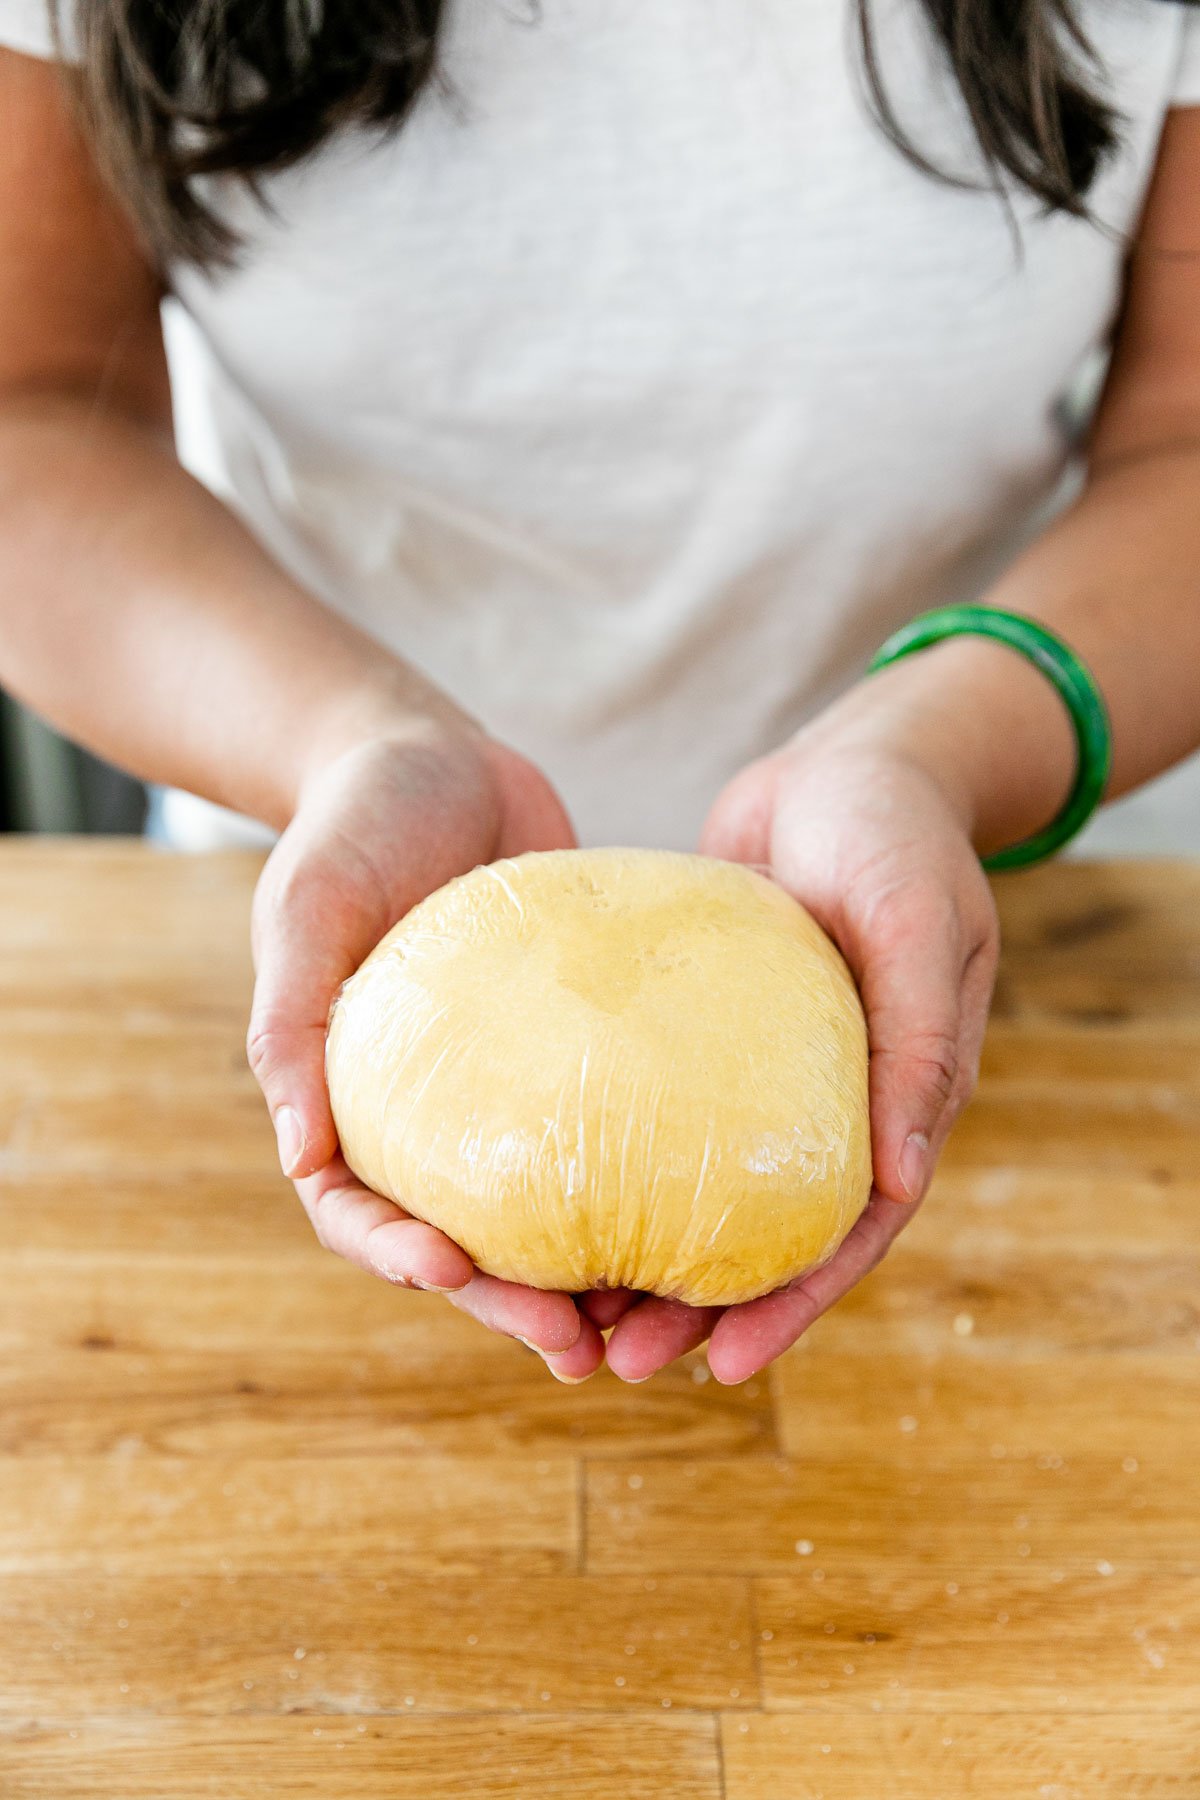 How to Make Homemade Pasta, Step 4: Rest the Pasta Dough. Jess of Plays Well With Butter holds a finished fresh pasta dough ball that has been tightly wrapped in plastic with both hands, ready to allow it to rest.